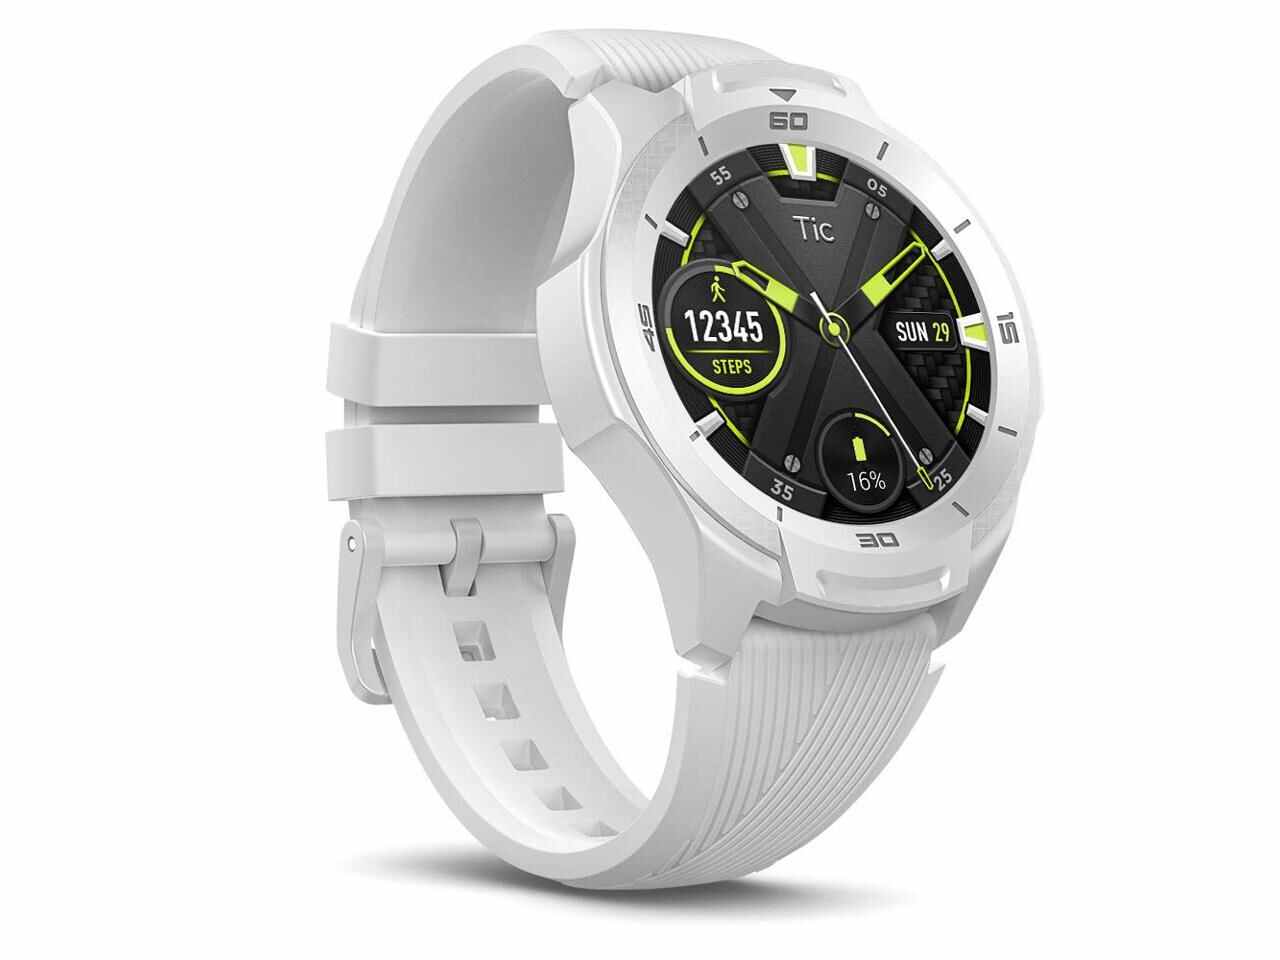 TicWatch S2 Glacier White Smart Watch US Military Satandard 810G Bluetooth Smartwatch with GPS Wear OS by Google 5 ATM Waterproof Android & iOS Compatible 2-Day Batterylife